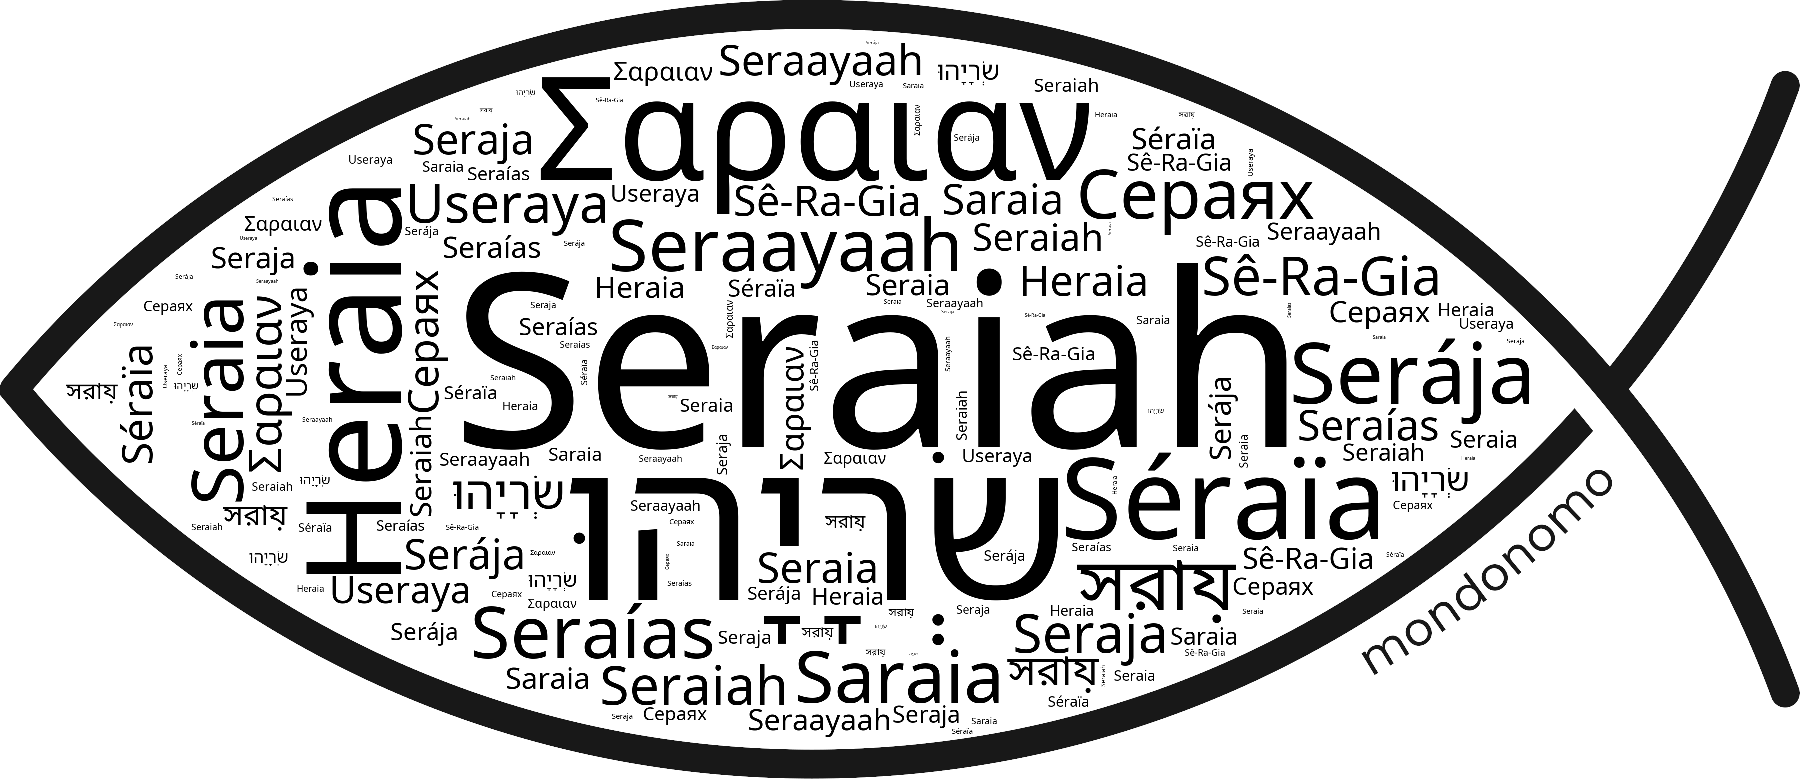 Name Seraiah in the world's Bibles